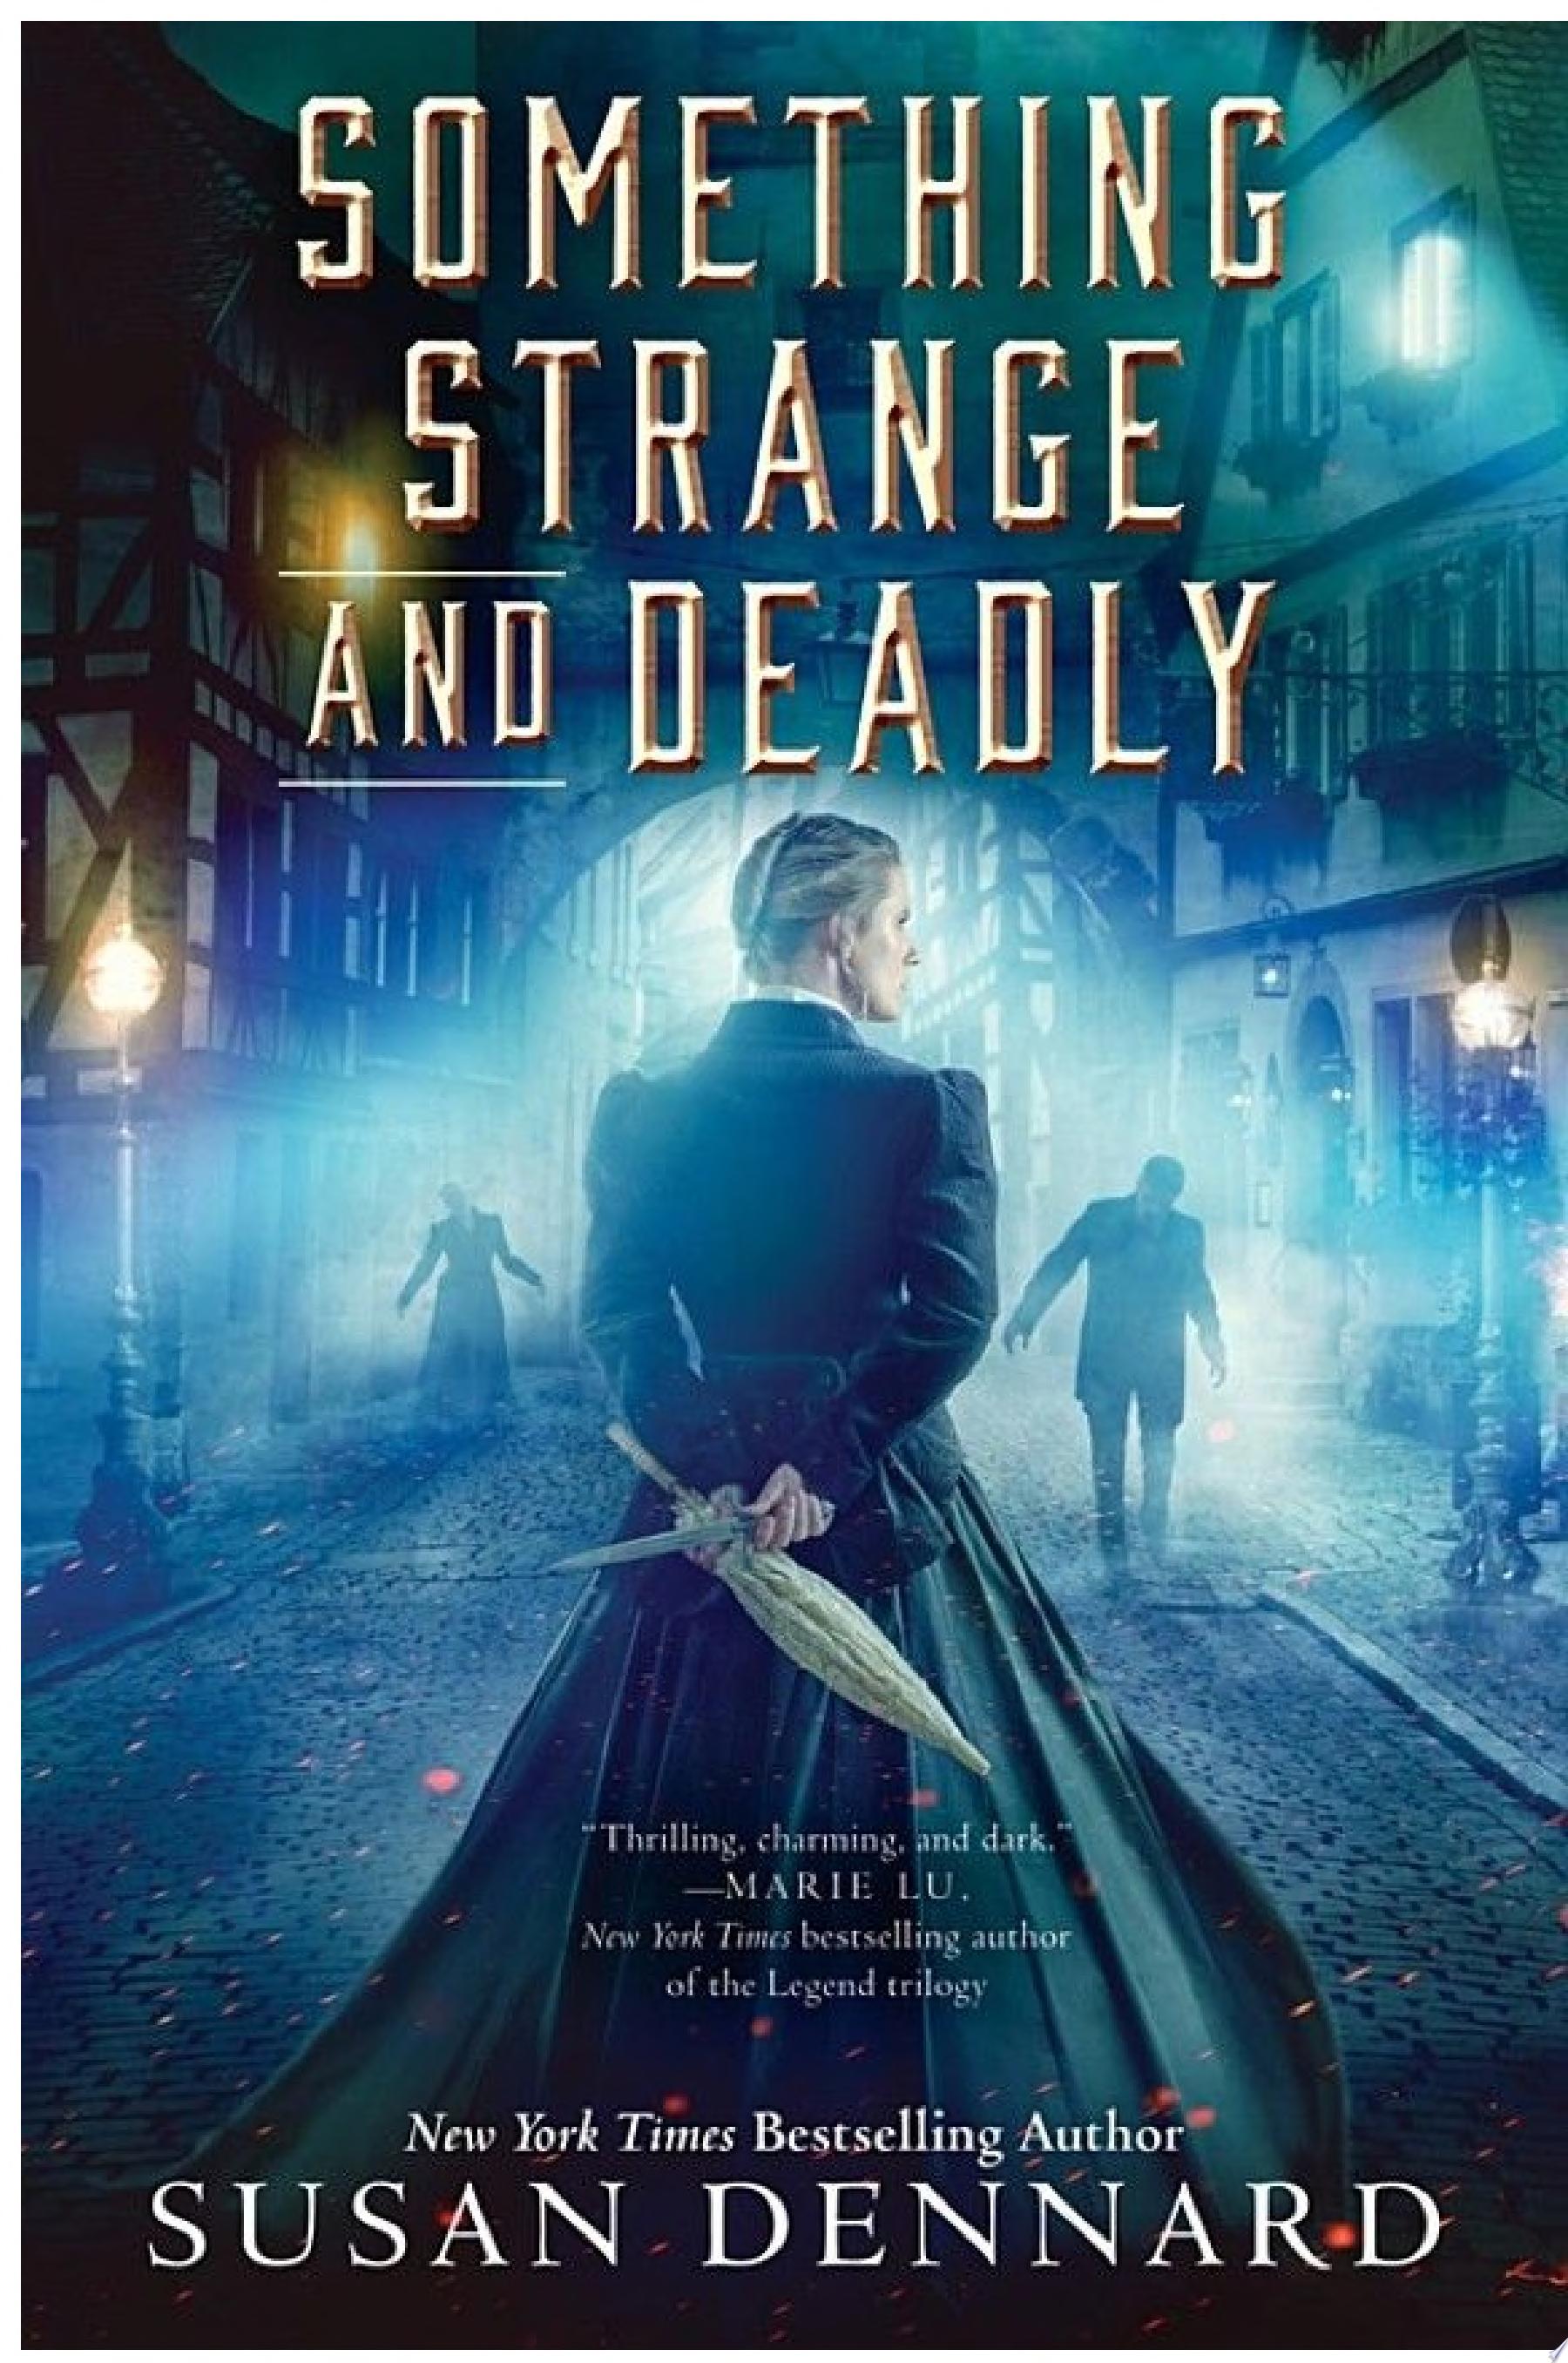 Image for "Something Strange and Deadly"